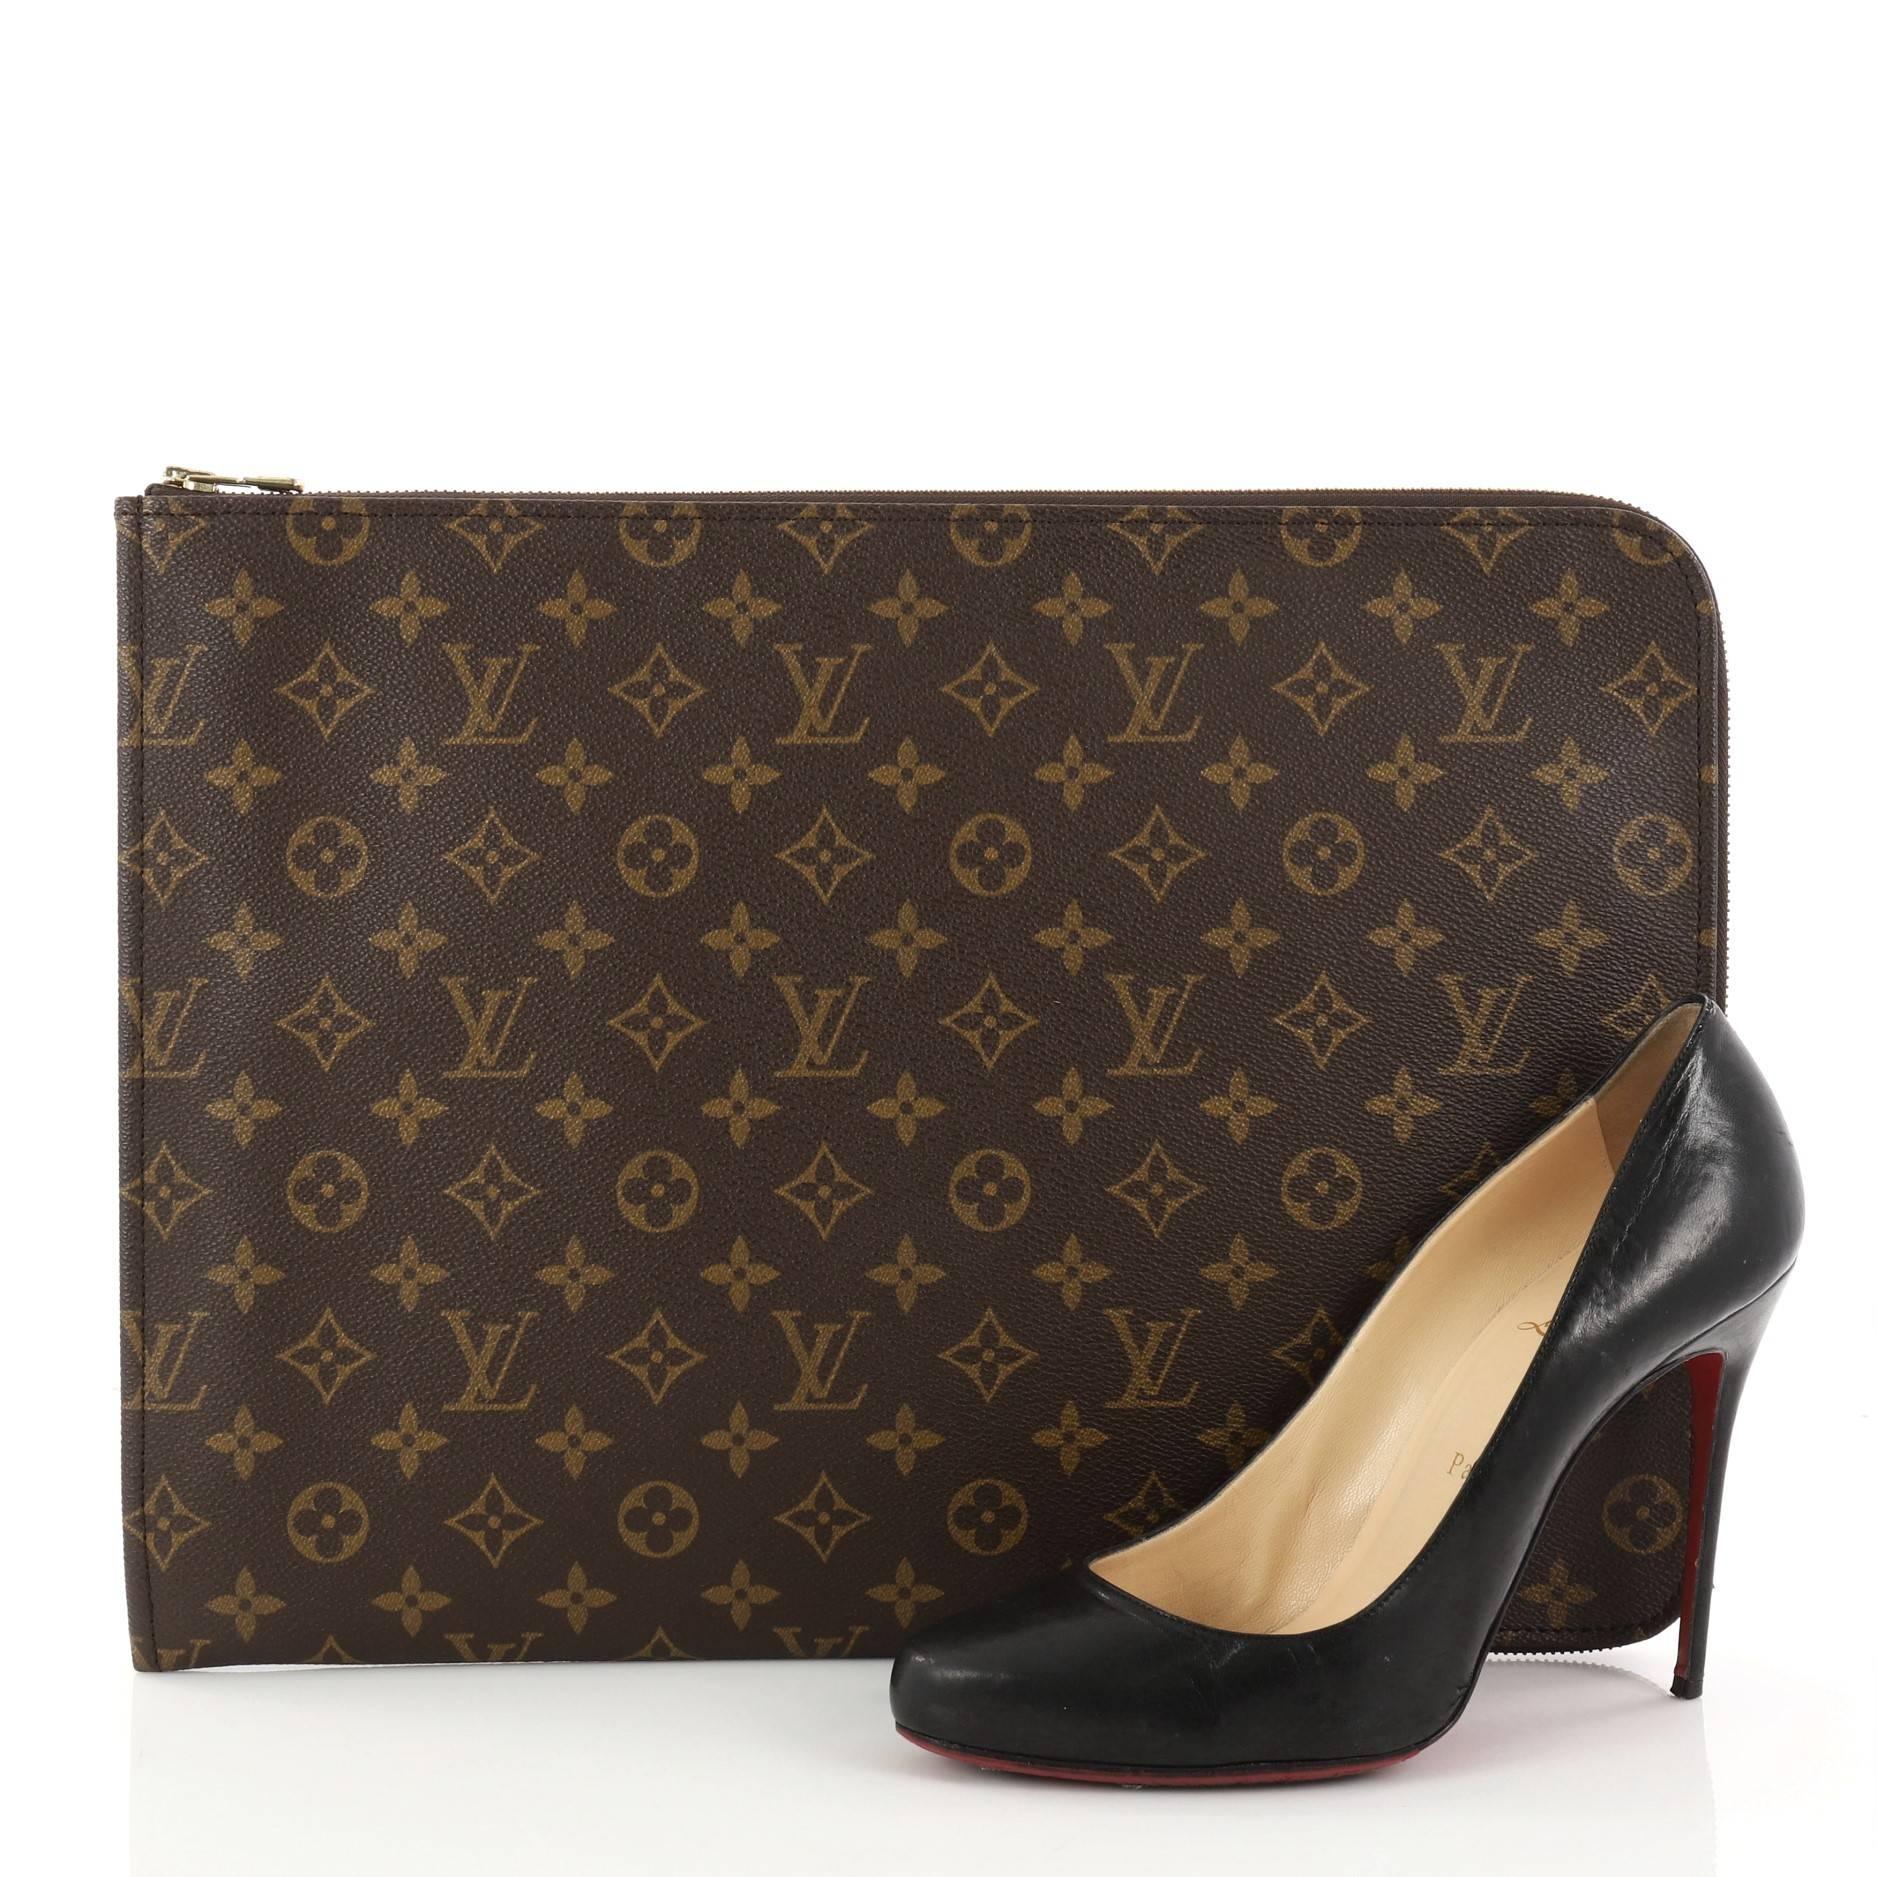 This authentic Louis Vuitton Poche Documents Monogram Canvas combines style and functionality ideal for work. Crafted with Louis Vuitton's iconic brown monogram coated canvas, this stylish poche features a gold-tone zip-around hardware closure that